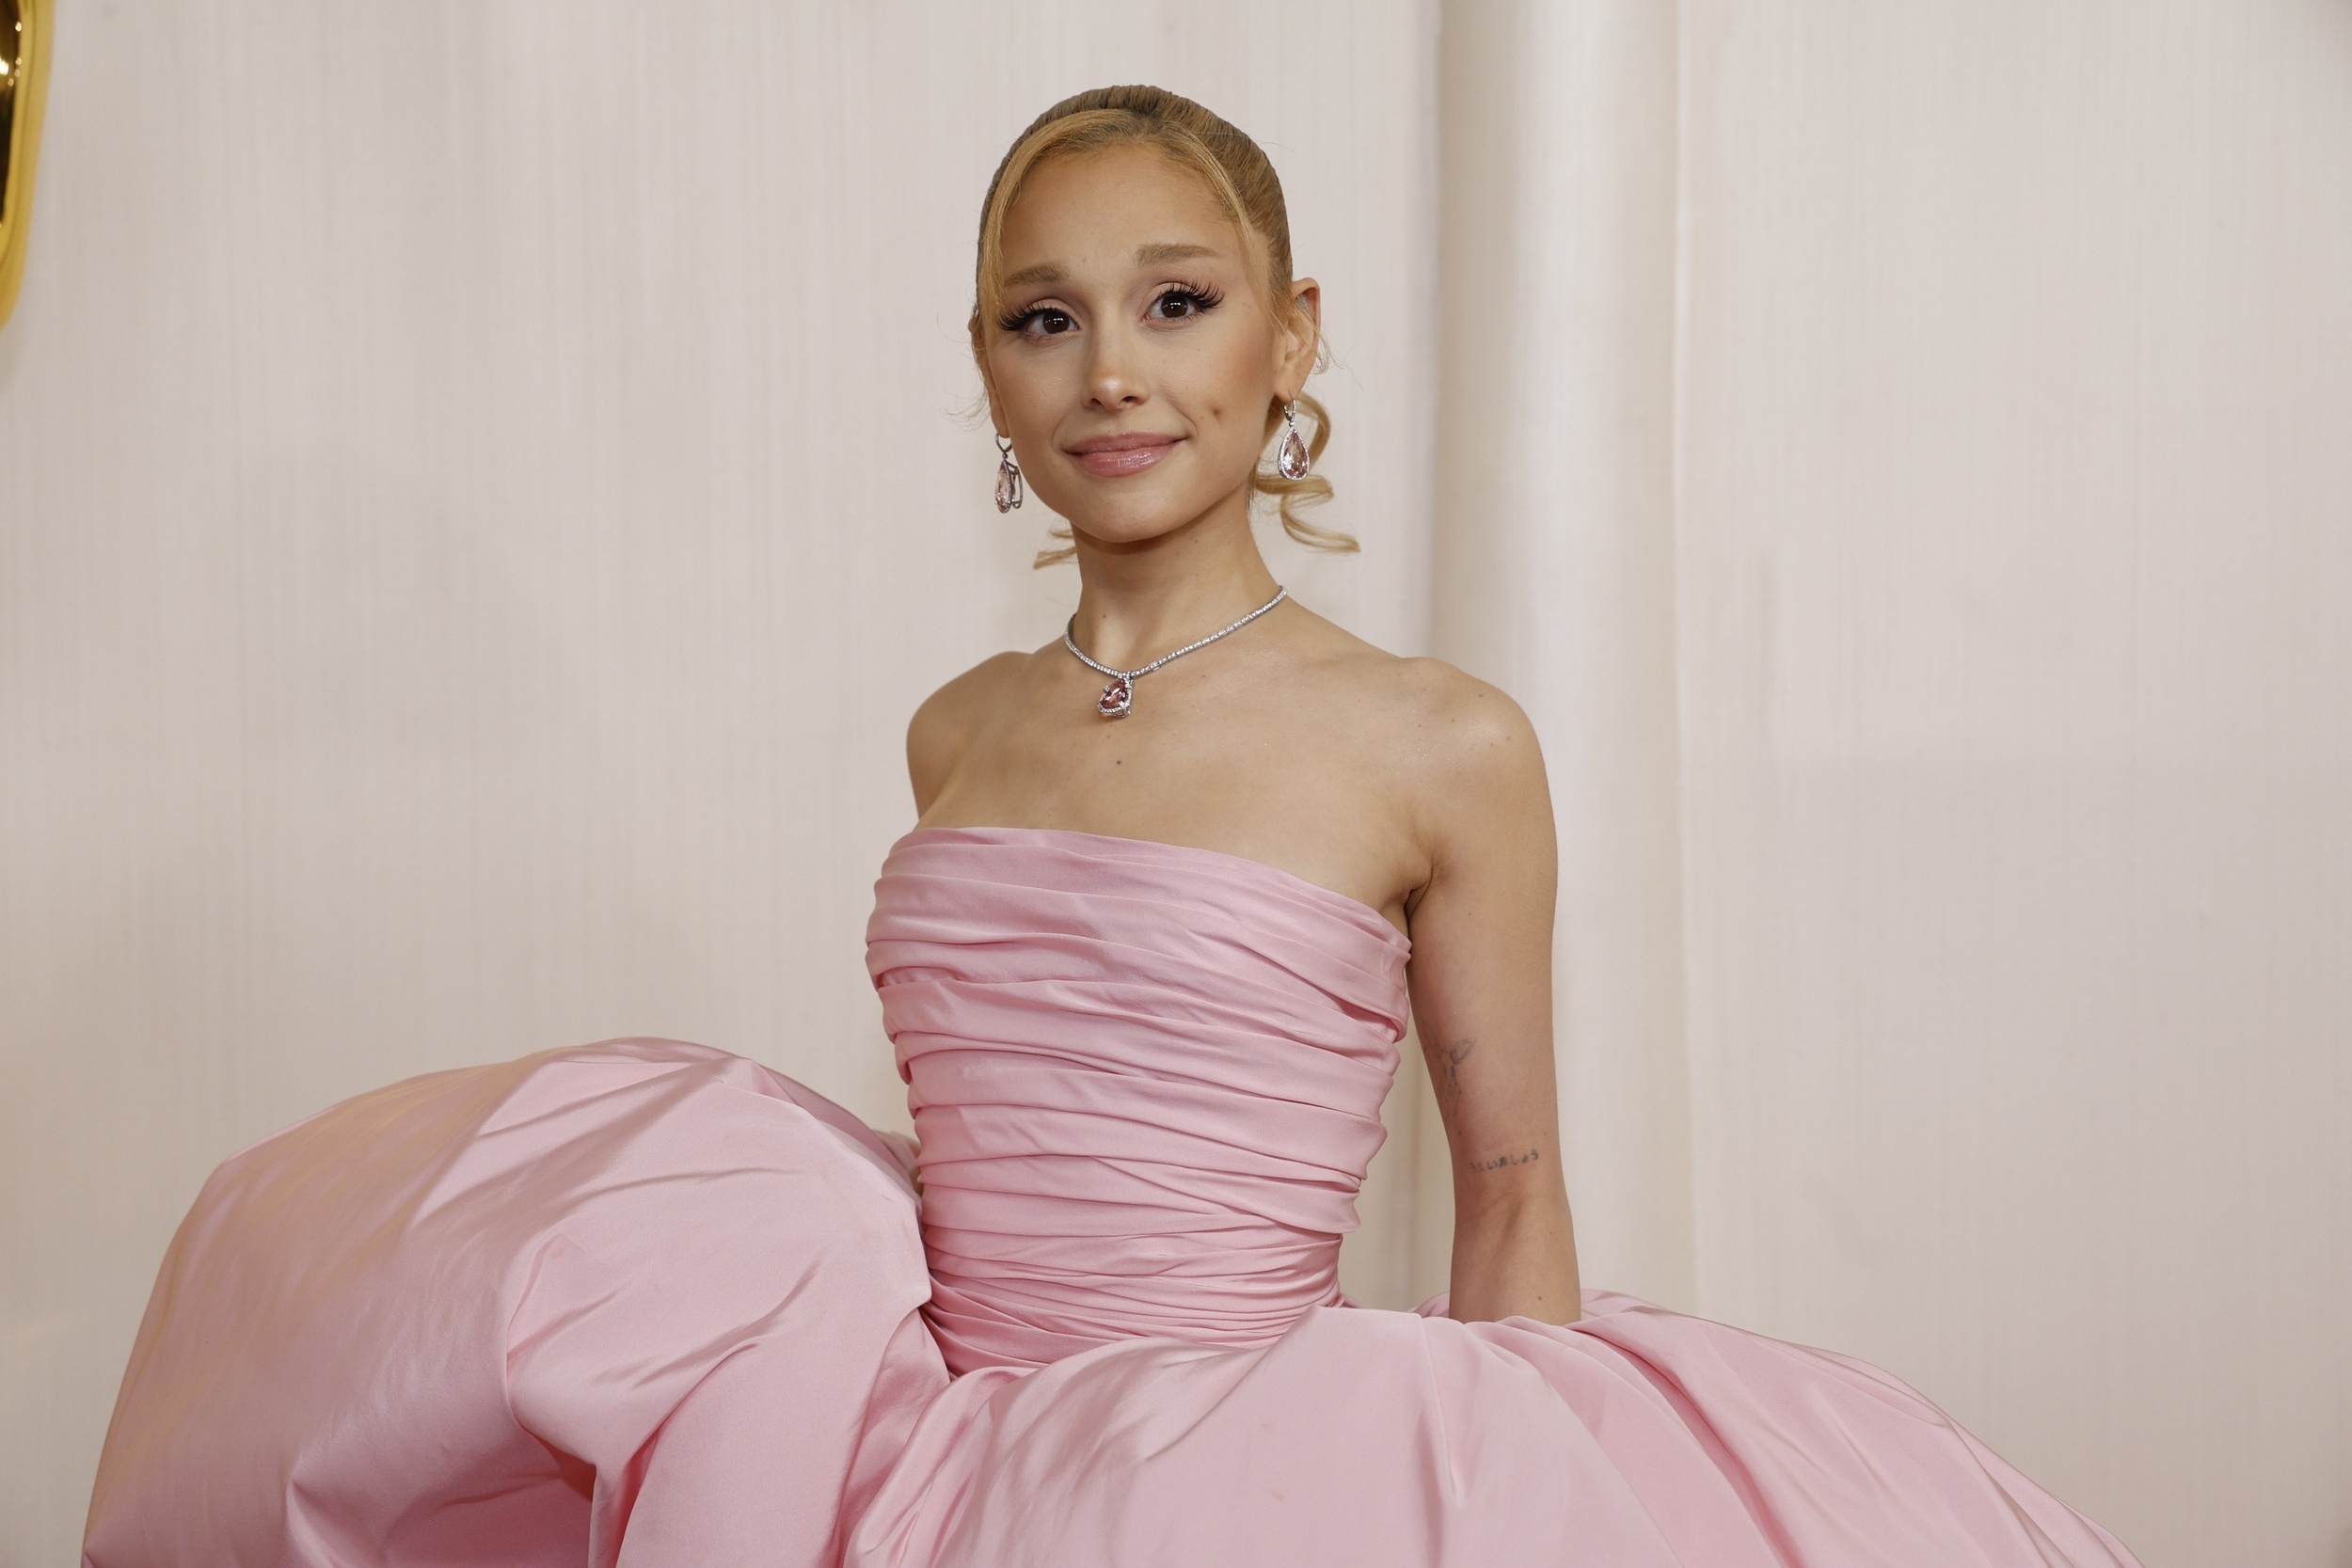 <p>We already knew Ariana Grande was a great singer from her two albums before <em>Dangerous Woman</em>. However, she put something different in this one. The title track is something different, with powerful lyrics most of us can relate to — and the bridge is built for a group sing-along.</p><p><a href='https://www.msn.com/en-us/community/channel/vid-cj9pqbr0vn9in2b6ddcd8sfgpfq6x6utp44fssrv6mc2gtybw0us'>Follow us on MSN to see more of our exclusive entertainment content.</a></p>